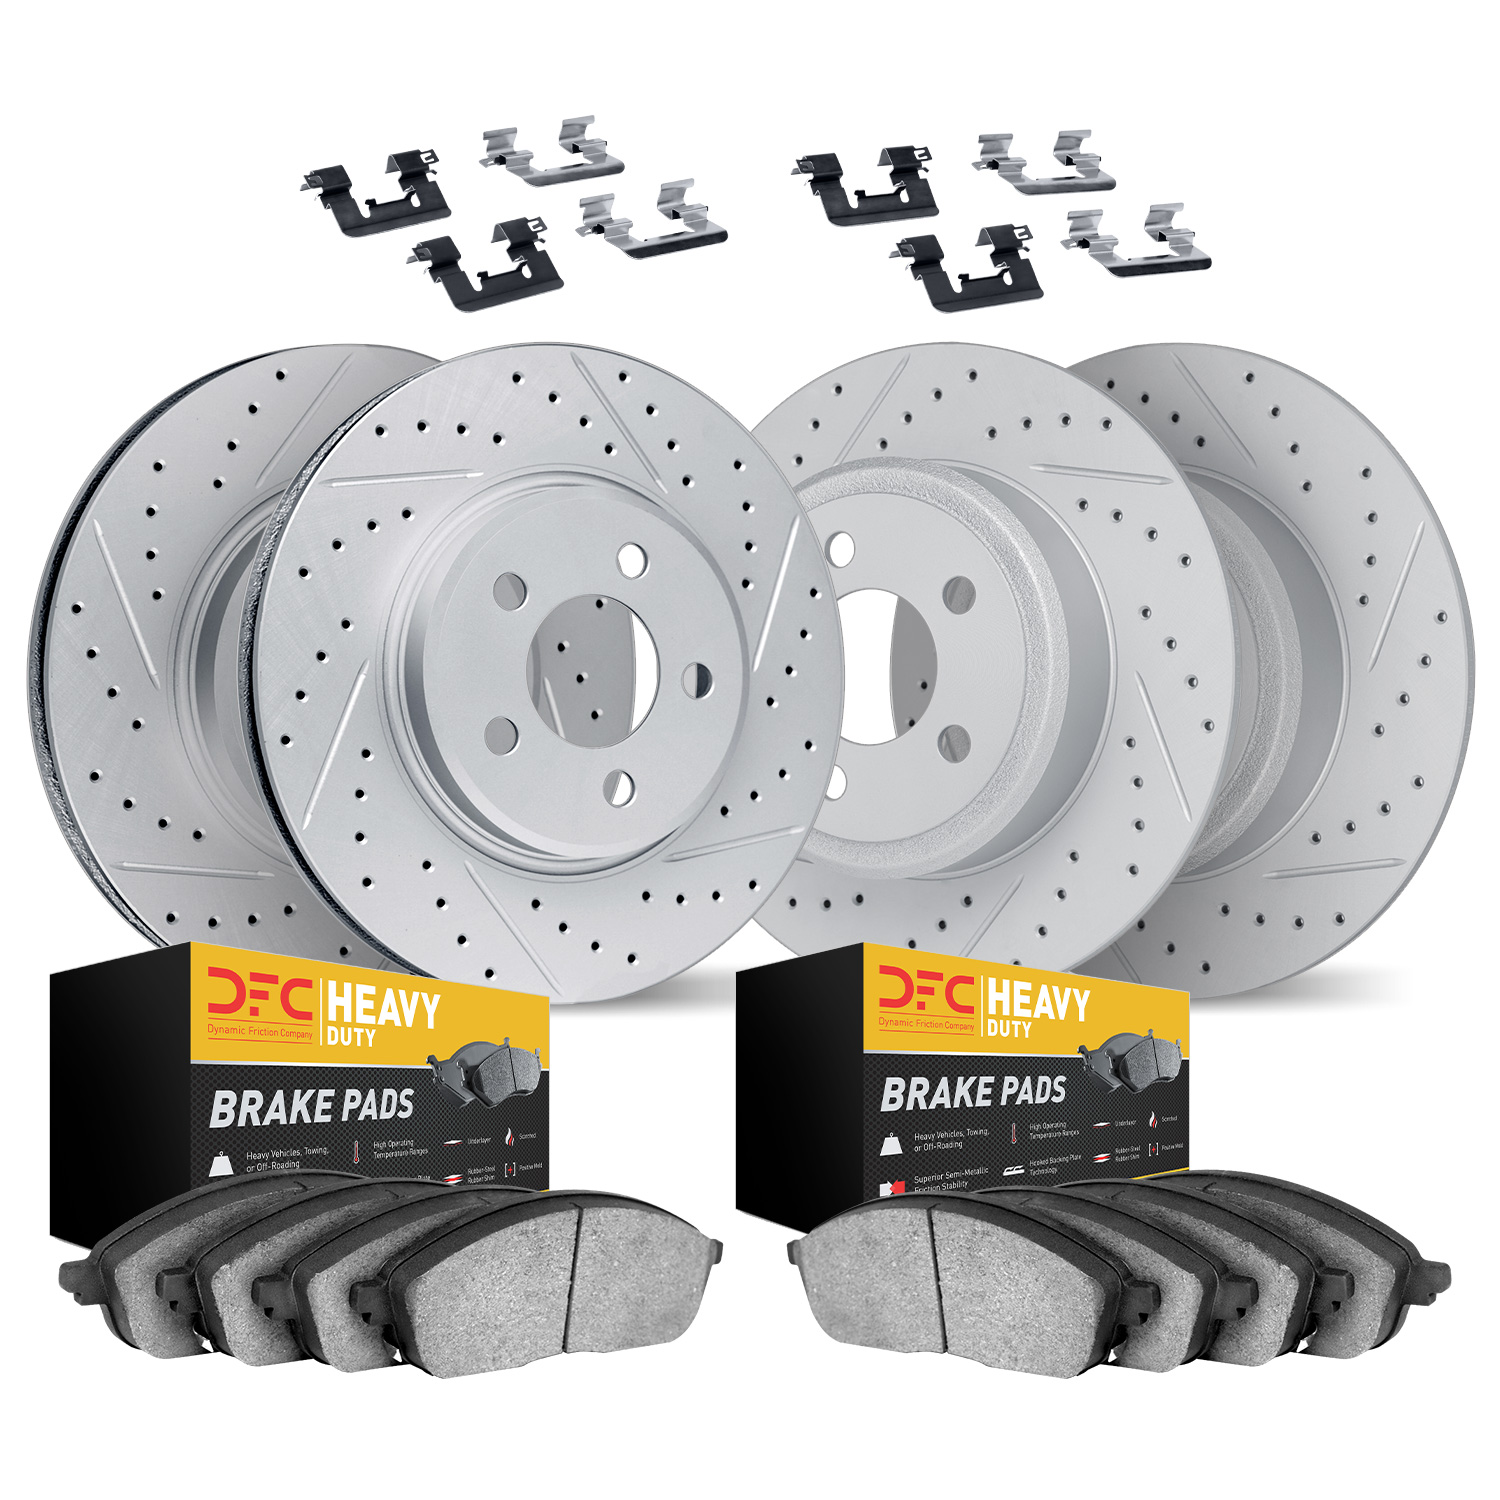 2214-99057 Geoperformance Drilled/Slotted Rotors w/Heavy-Duty Pads Kit & Hardware, 2000-2004 Ford/Lincoln/Mercury/Mazda, Positio